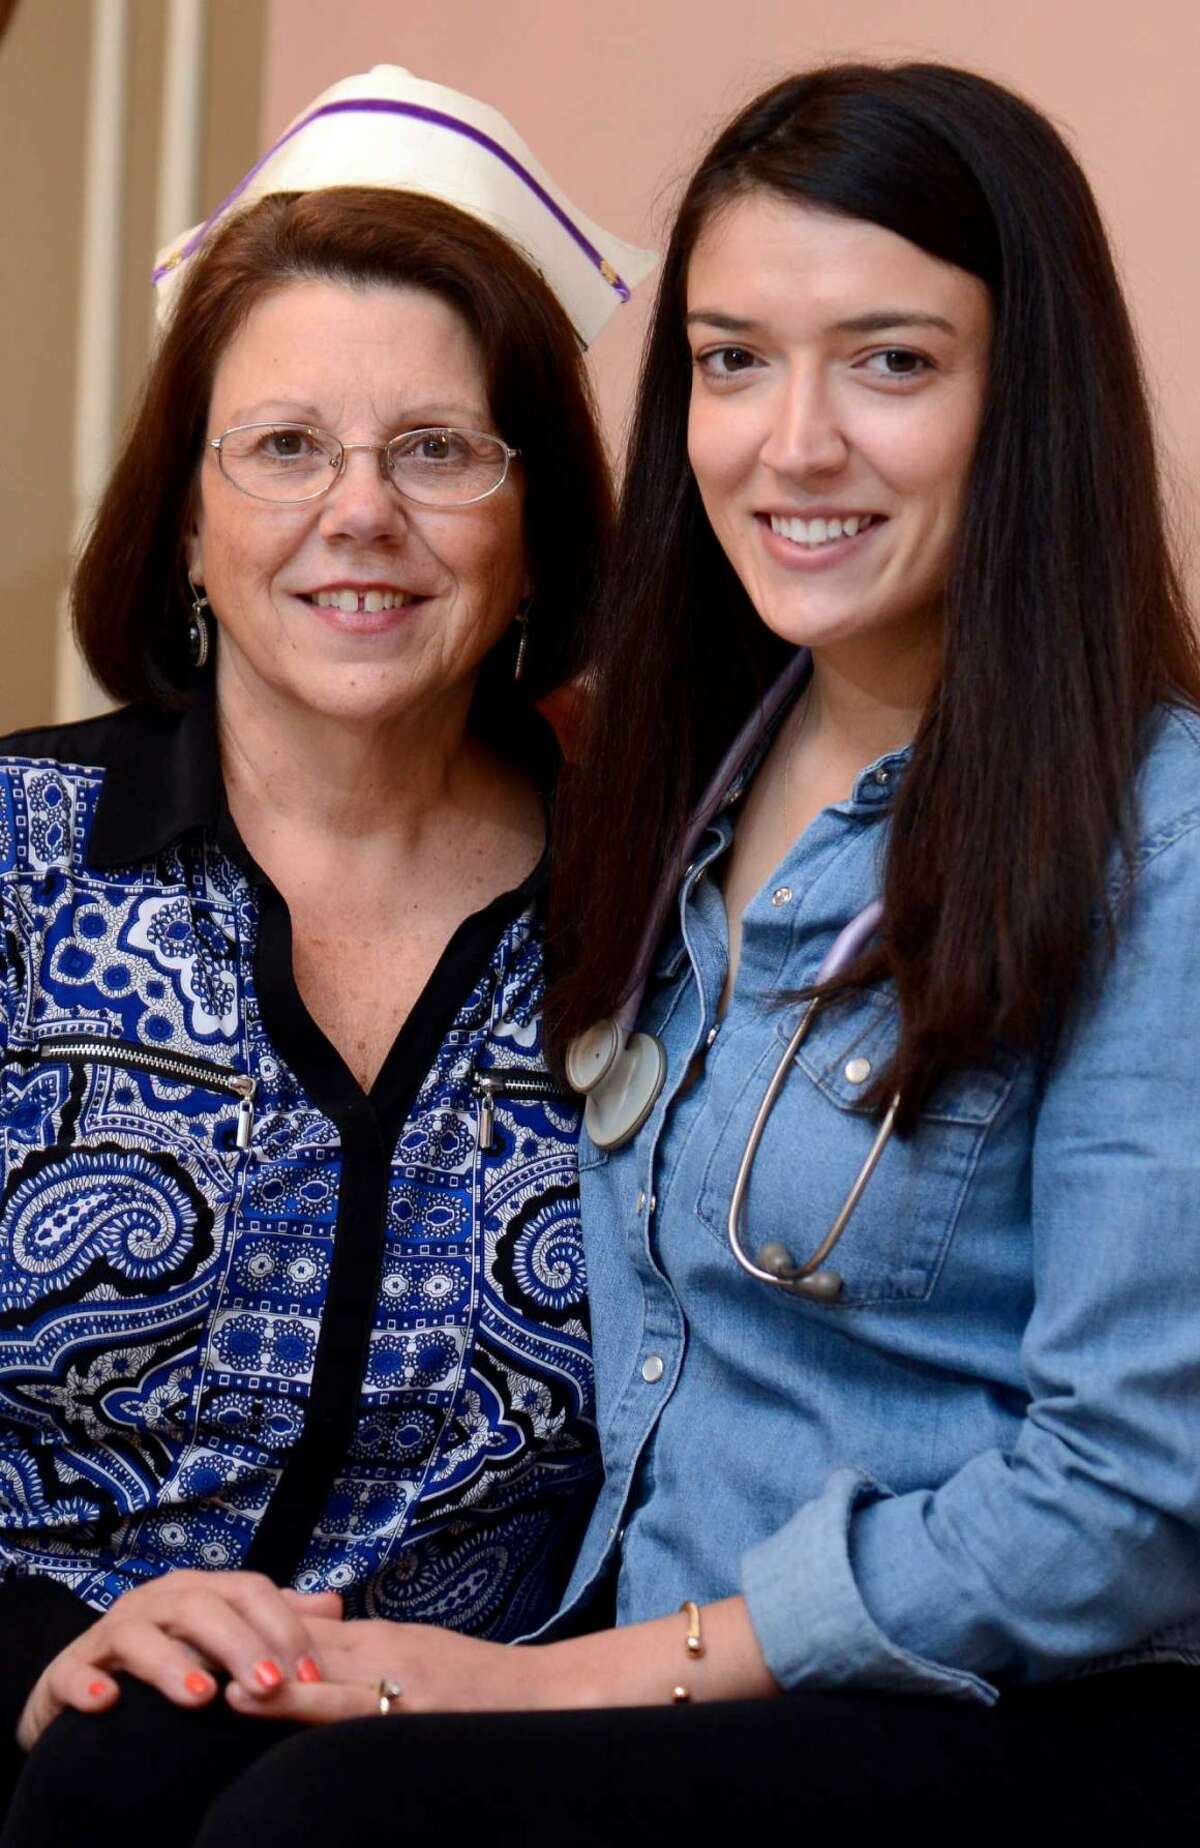 Lorraine Olson and her daughter Kelly, 26, are photographed on April 26, 2016 at their North Stamford home. Ms. Olson will fulfill her girlhood dream of becoming a nurse, like her mother, when she graduates from University of Bridgeport nursing school on Monday.